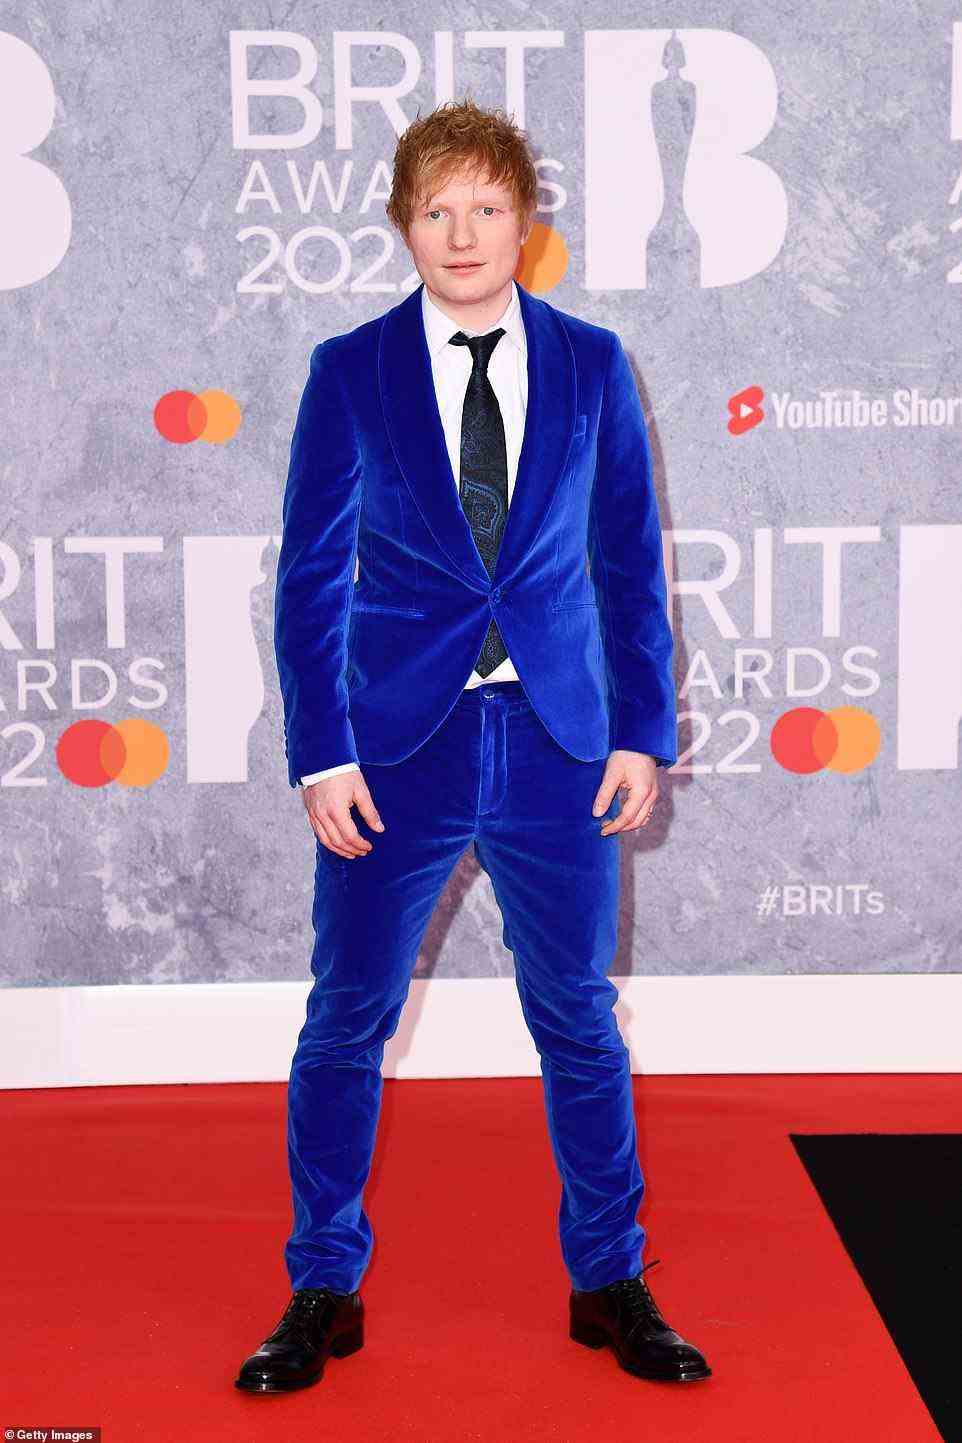 Legend: Ed Sheeran caught the eye in a bright blue velvet suit teamed with a white shirt and black tie as he arrived at the event